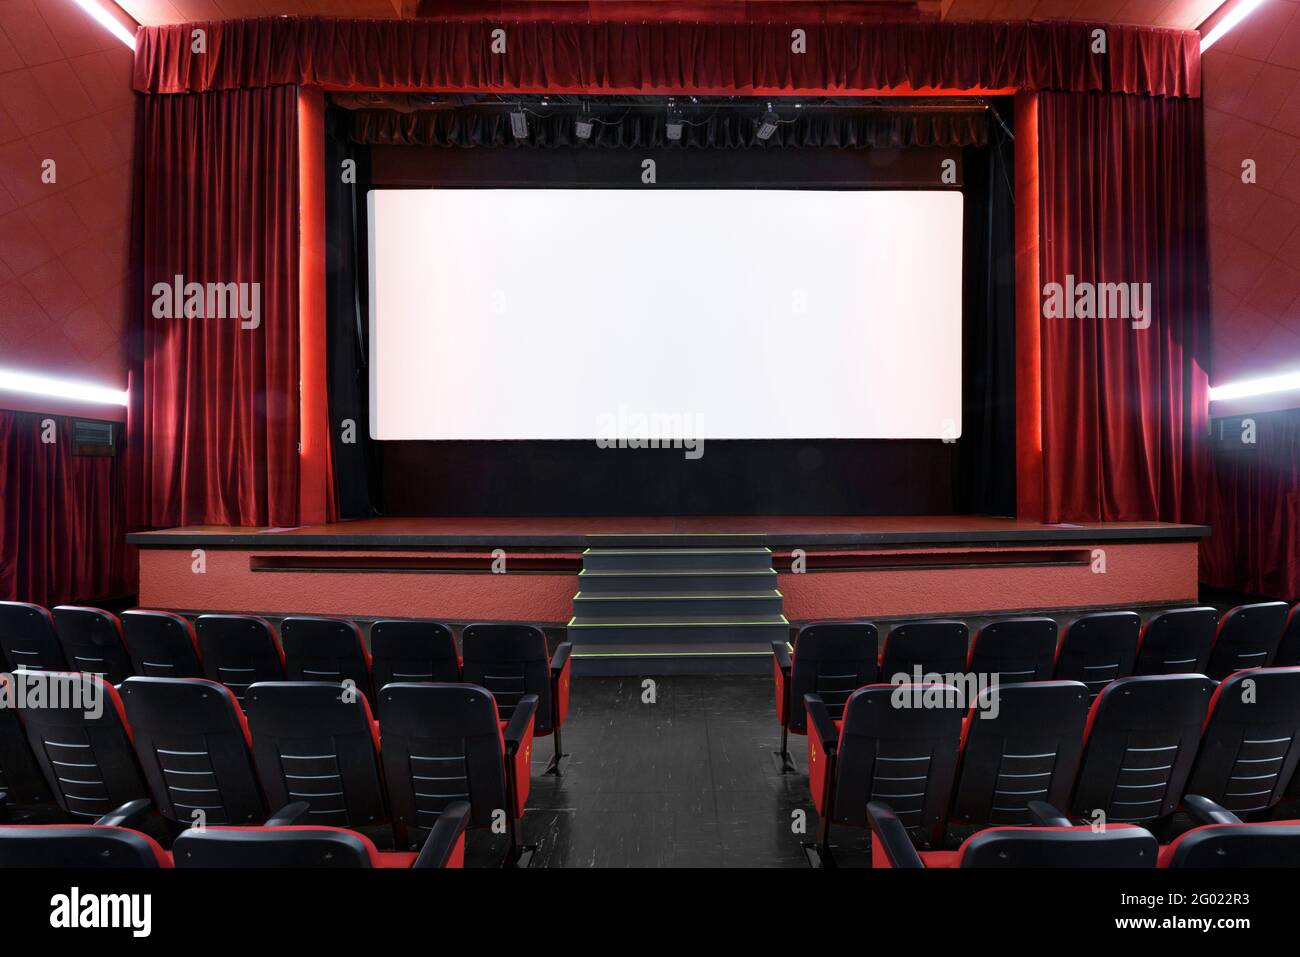 White blank screen in empty movie theater with rows of seats and red interior Stock Photo